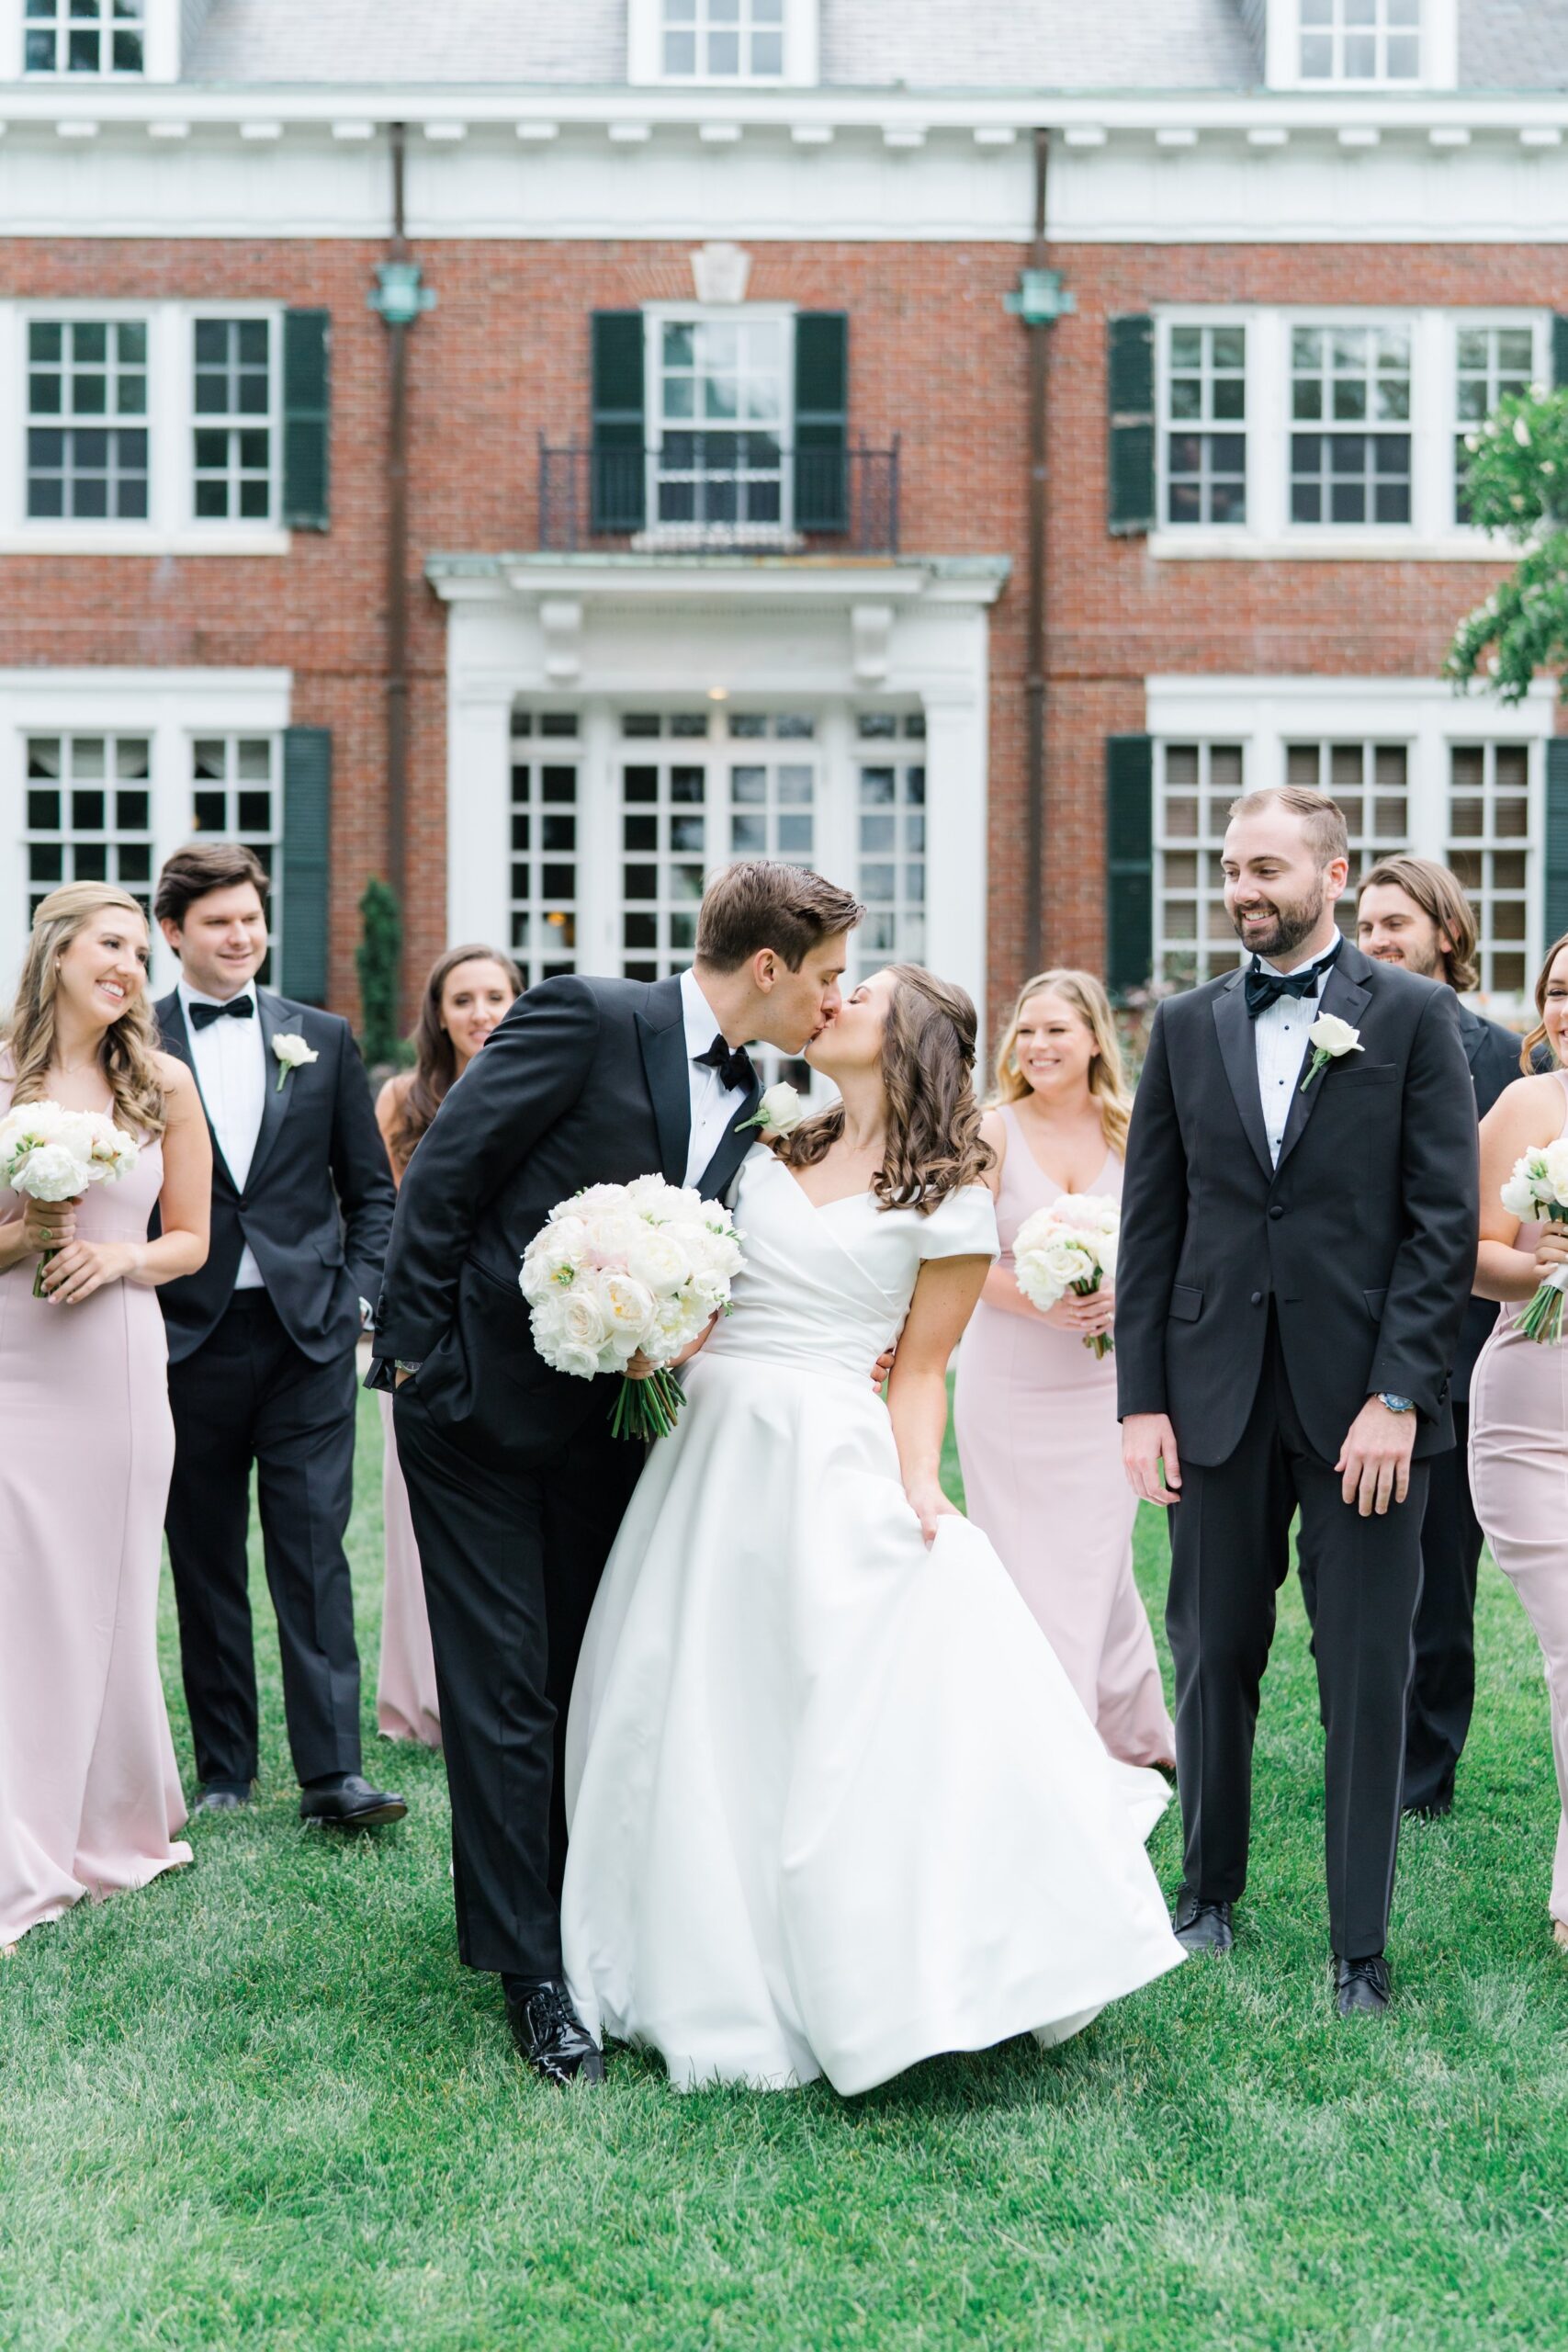 Groom grabs bride for dip kiss while walking with bridal party at boston summer wedding.